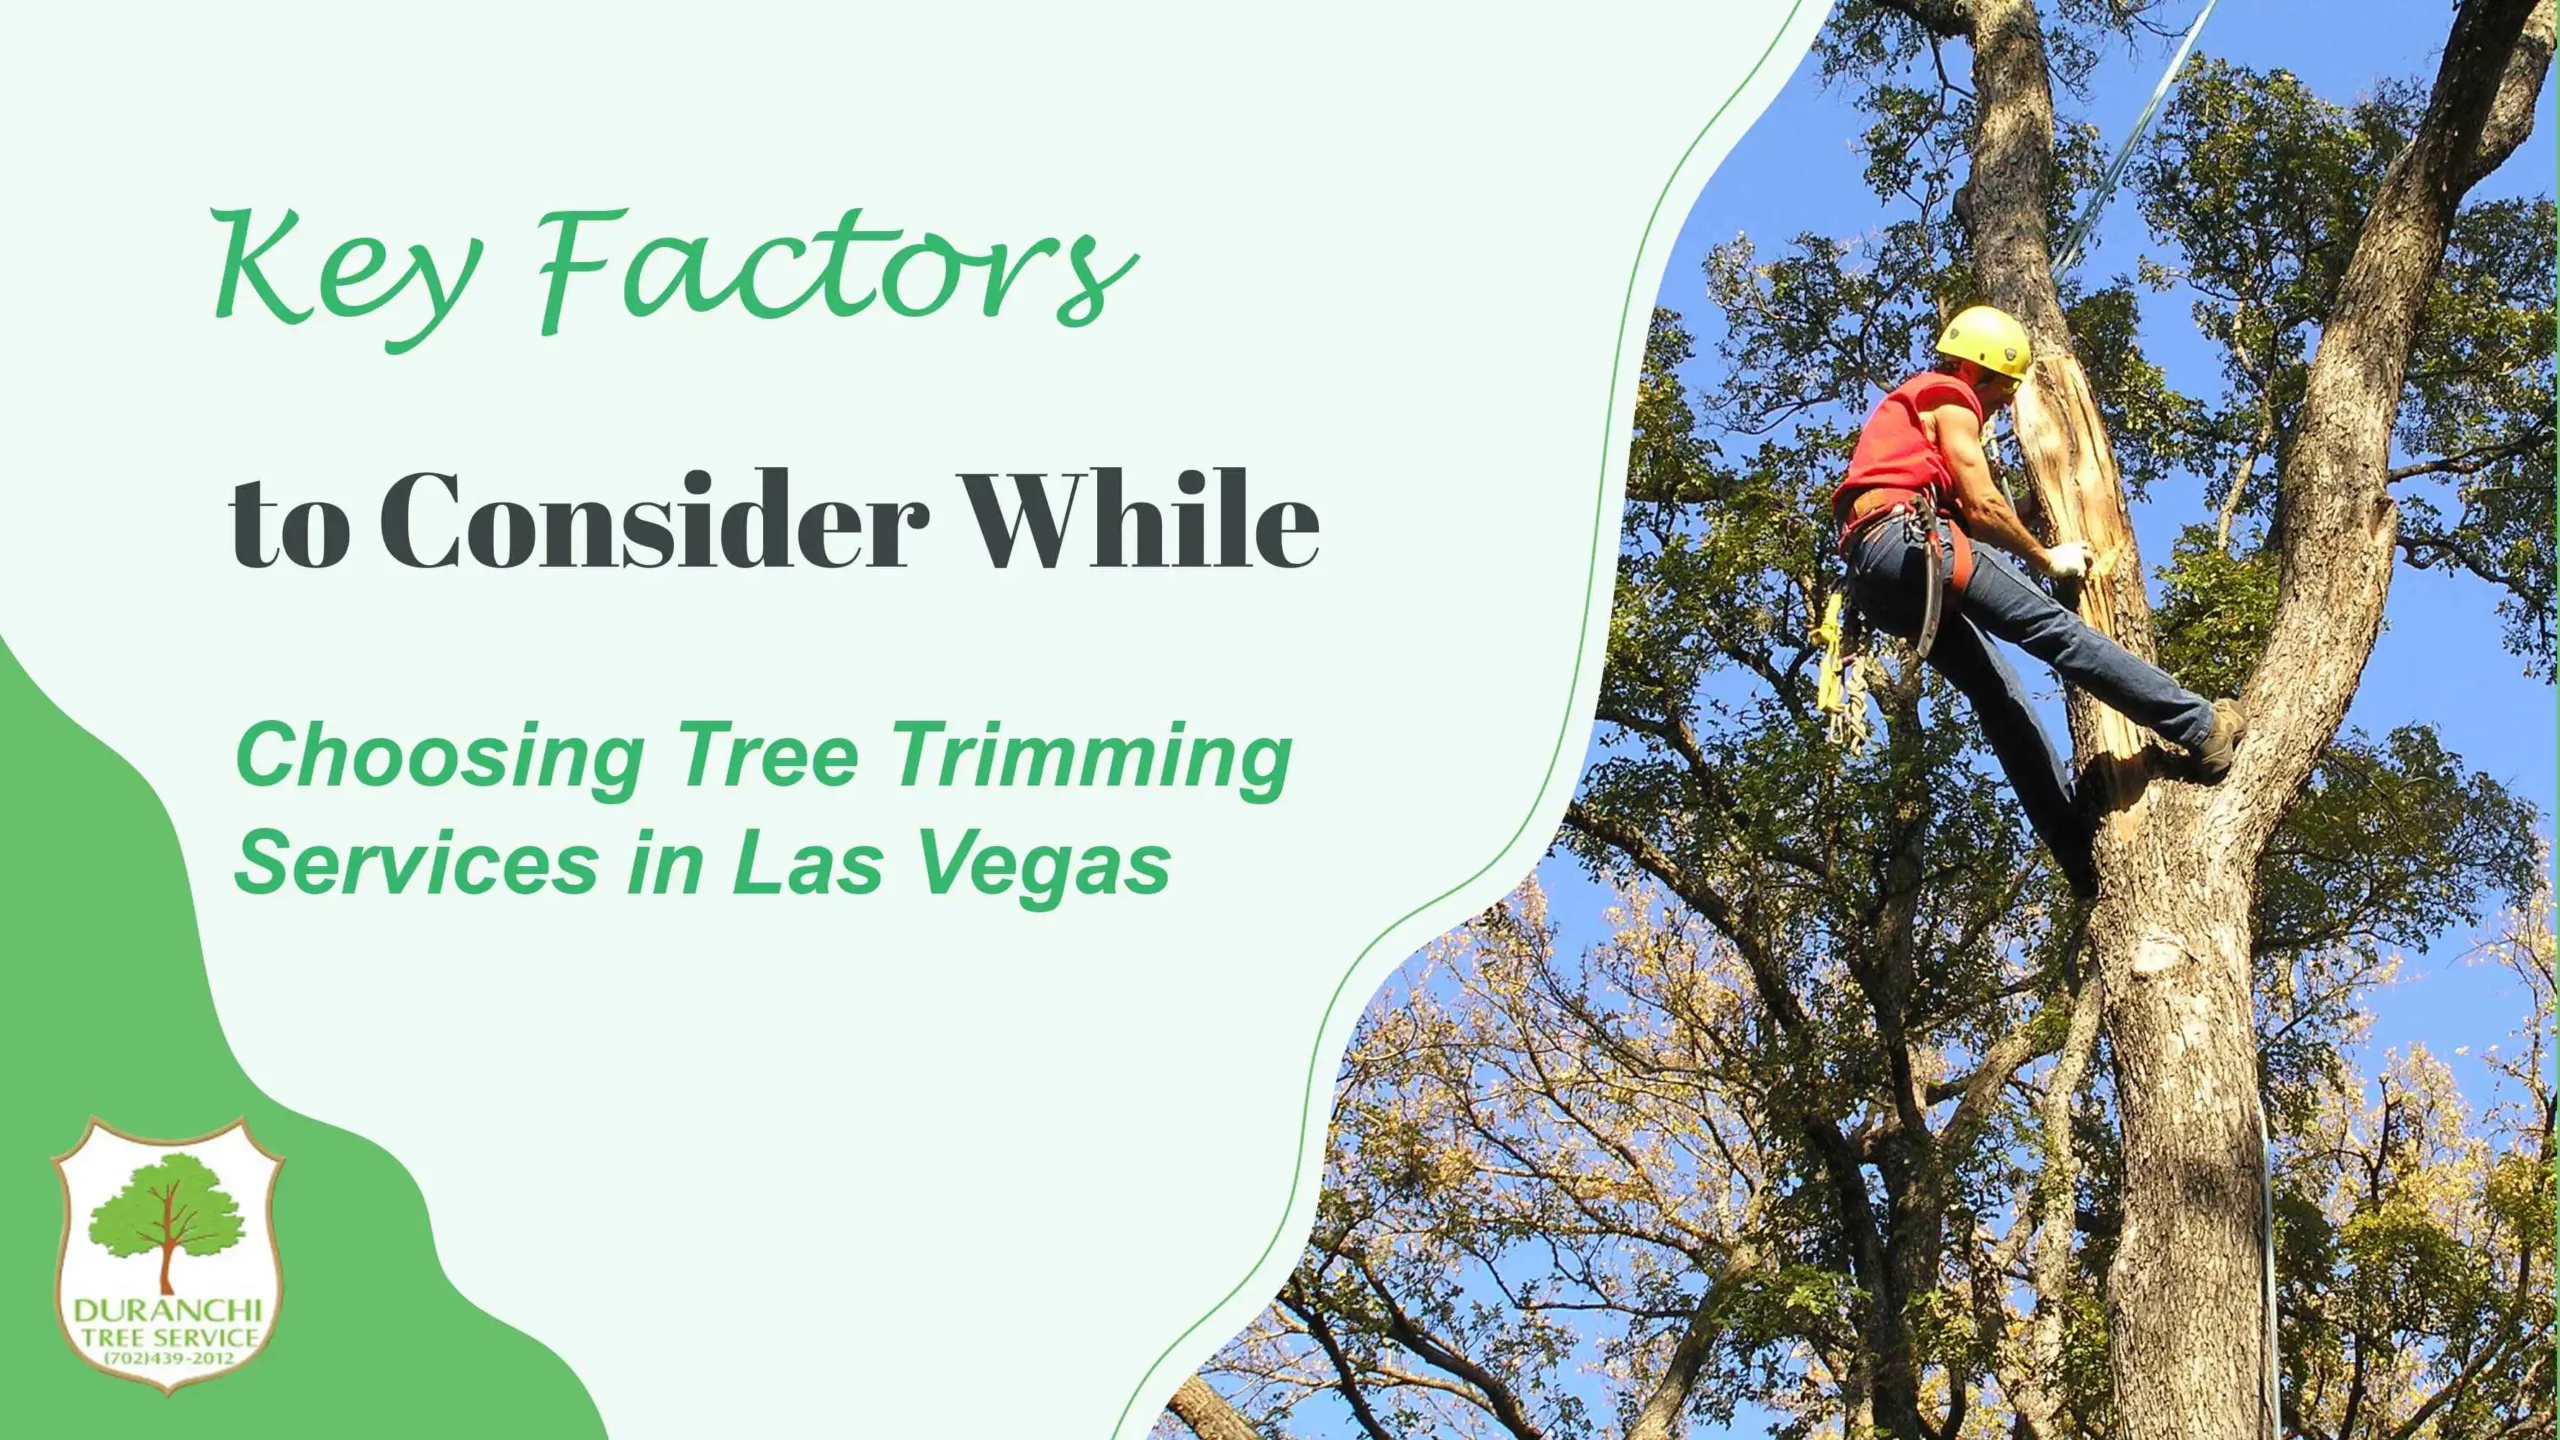 Key Factors to Consider While Choosing Tree Trimming Services in Las Vegas